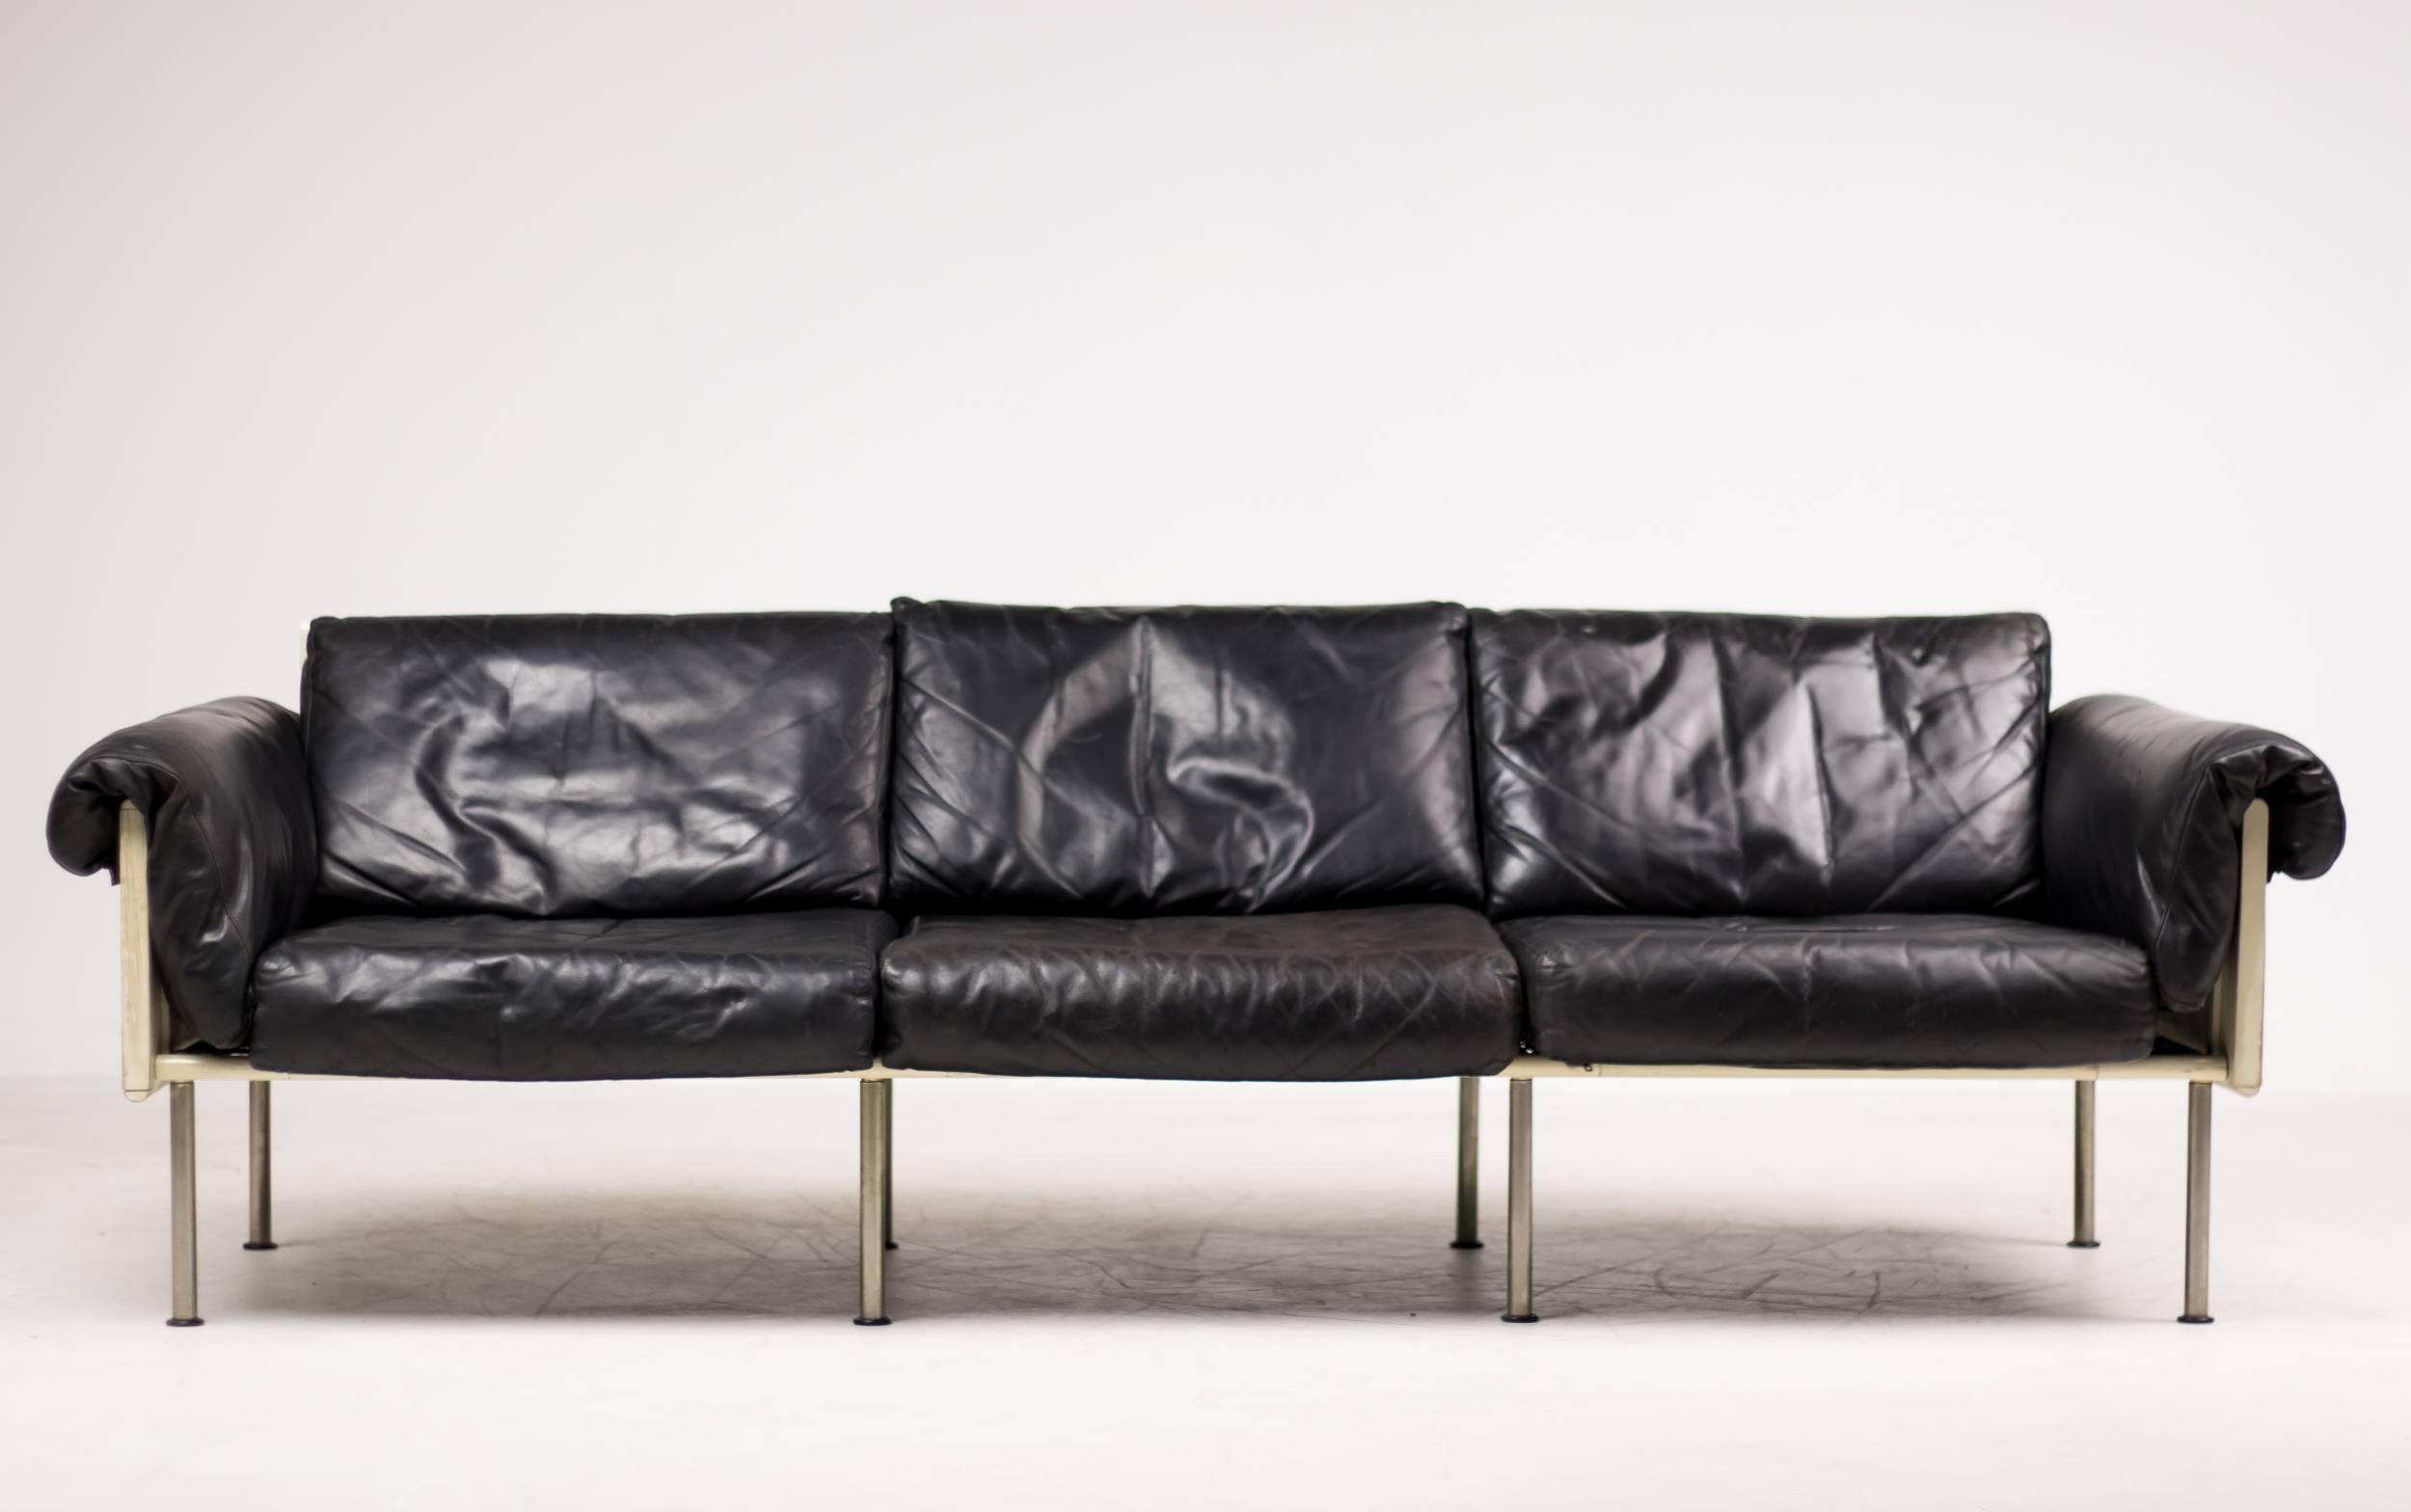 Architectural sofa in original black leather by Yrjö Kukkapuro for Haimi, Finland. 
White enameled tubular steel frame with painted plywood panels.
Marked with label.

Excellent fast and affordable worldwide shipping.
White glove delivery